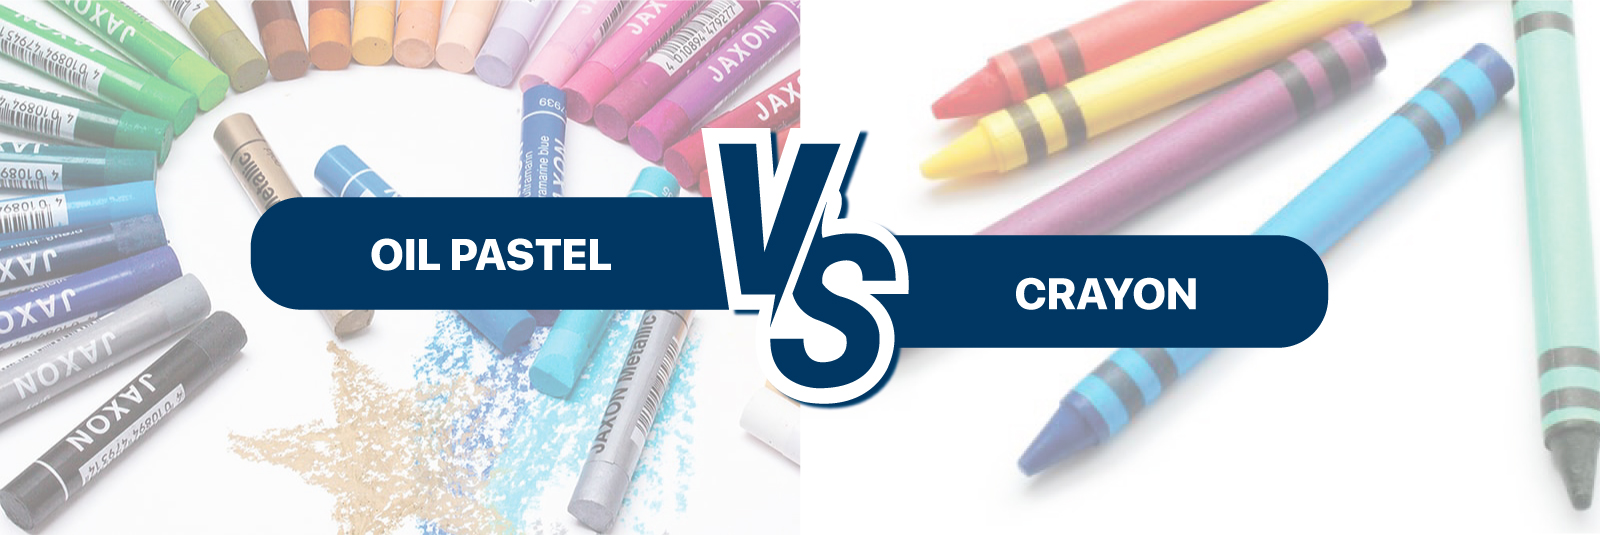 What are The Differences Between Paint, Crayon, Oil Pastel, and Colour  Pencils?